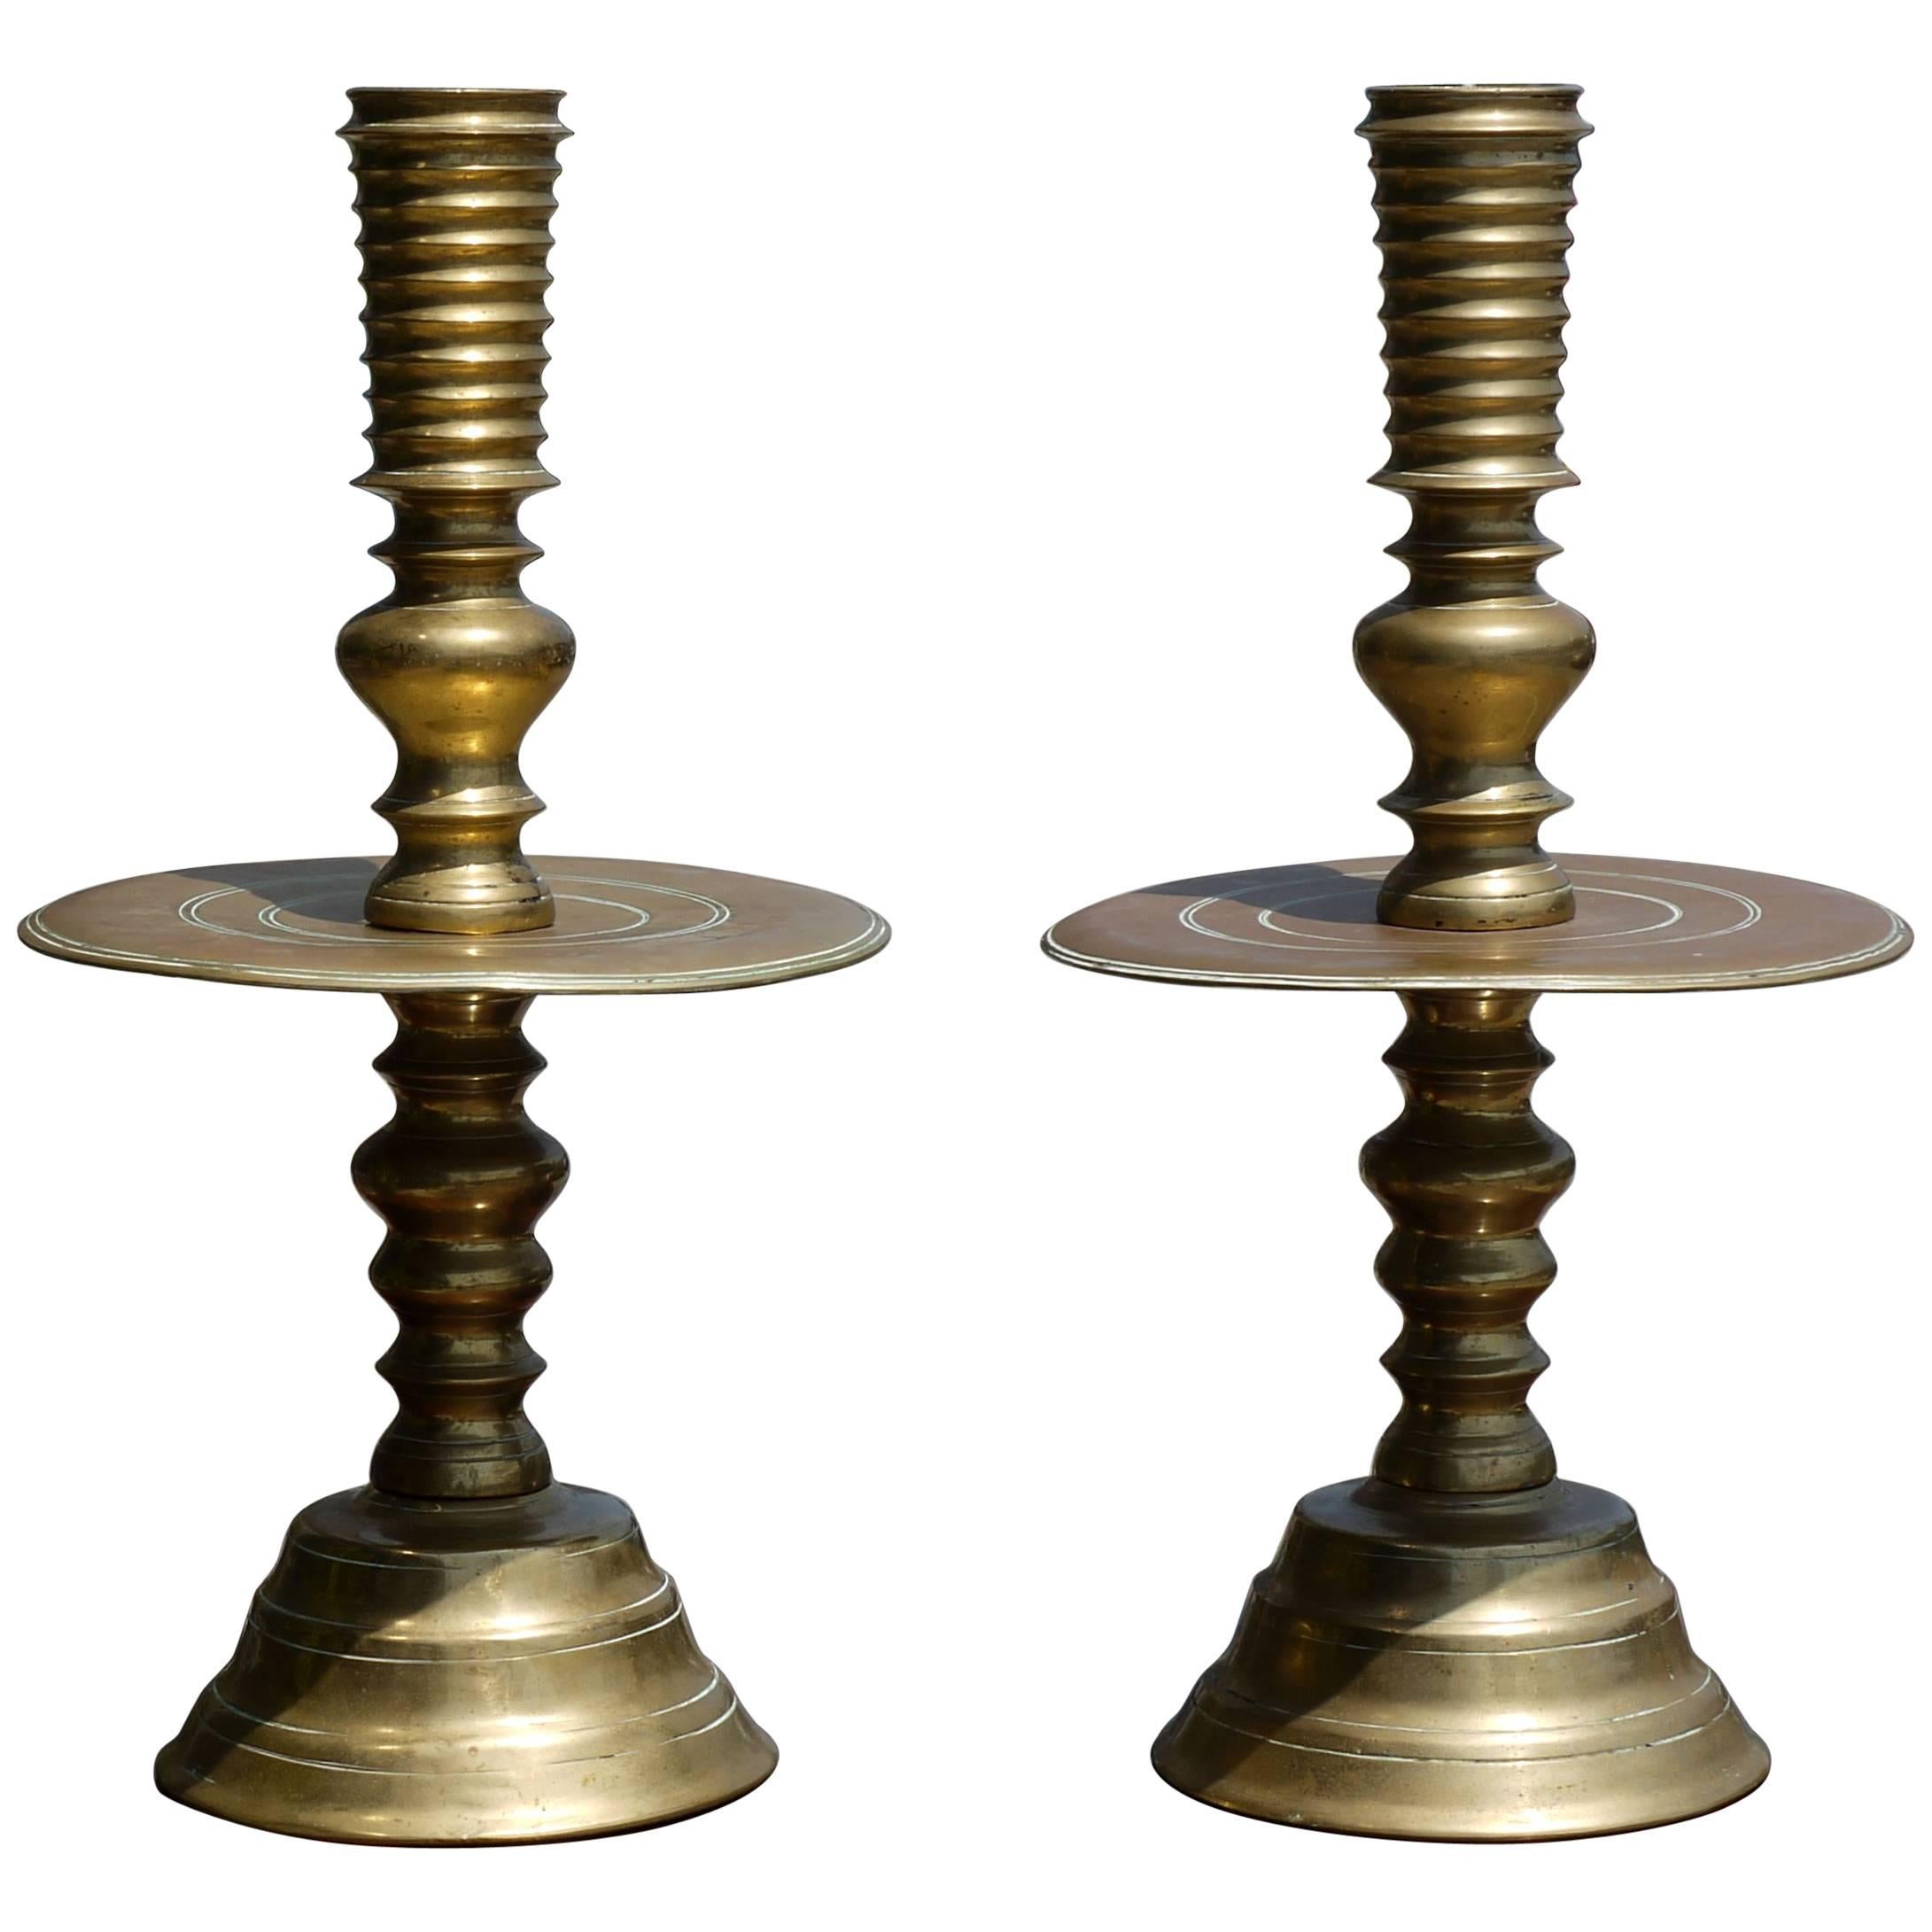 Massive Pair of Early 19th Century Brass Candlesticks For Sale